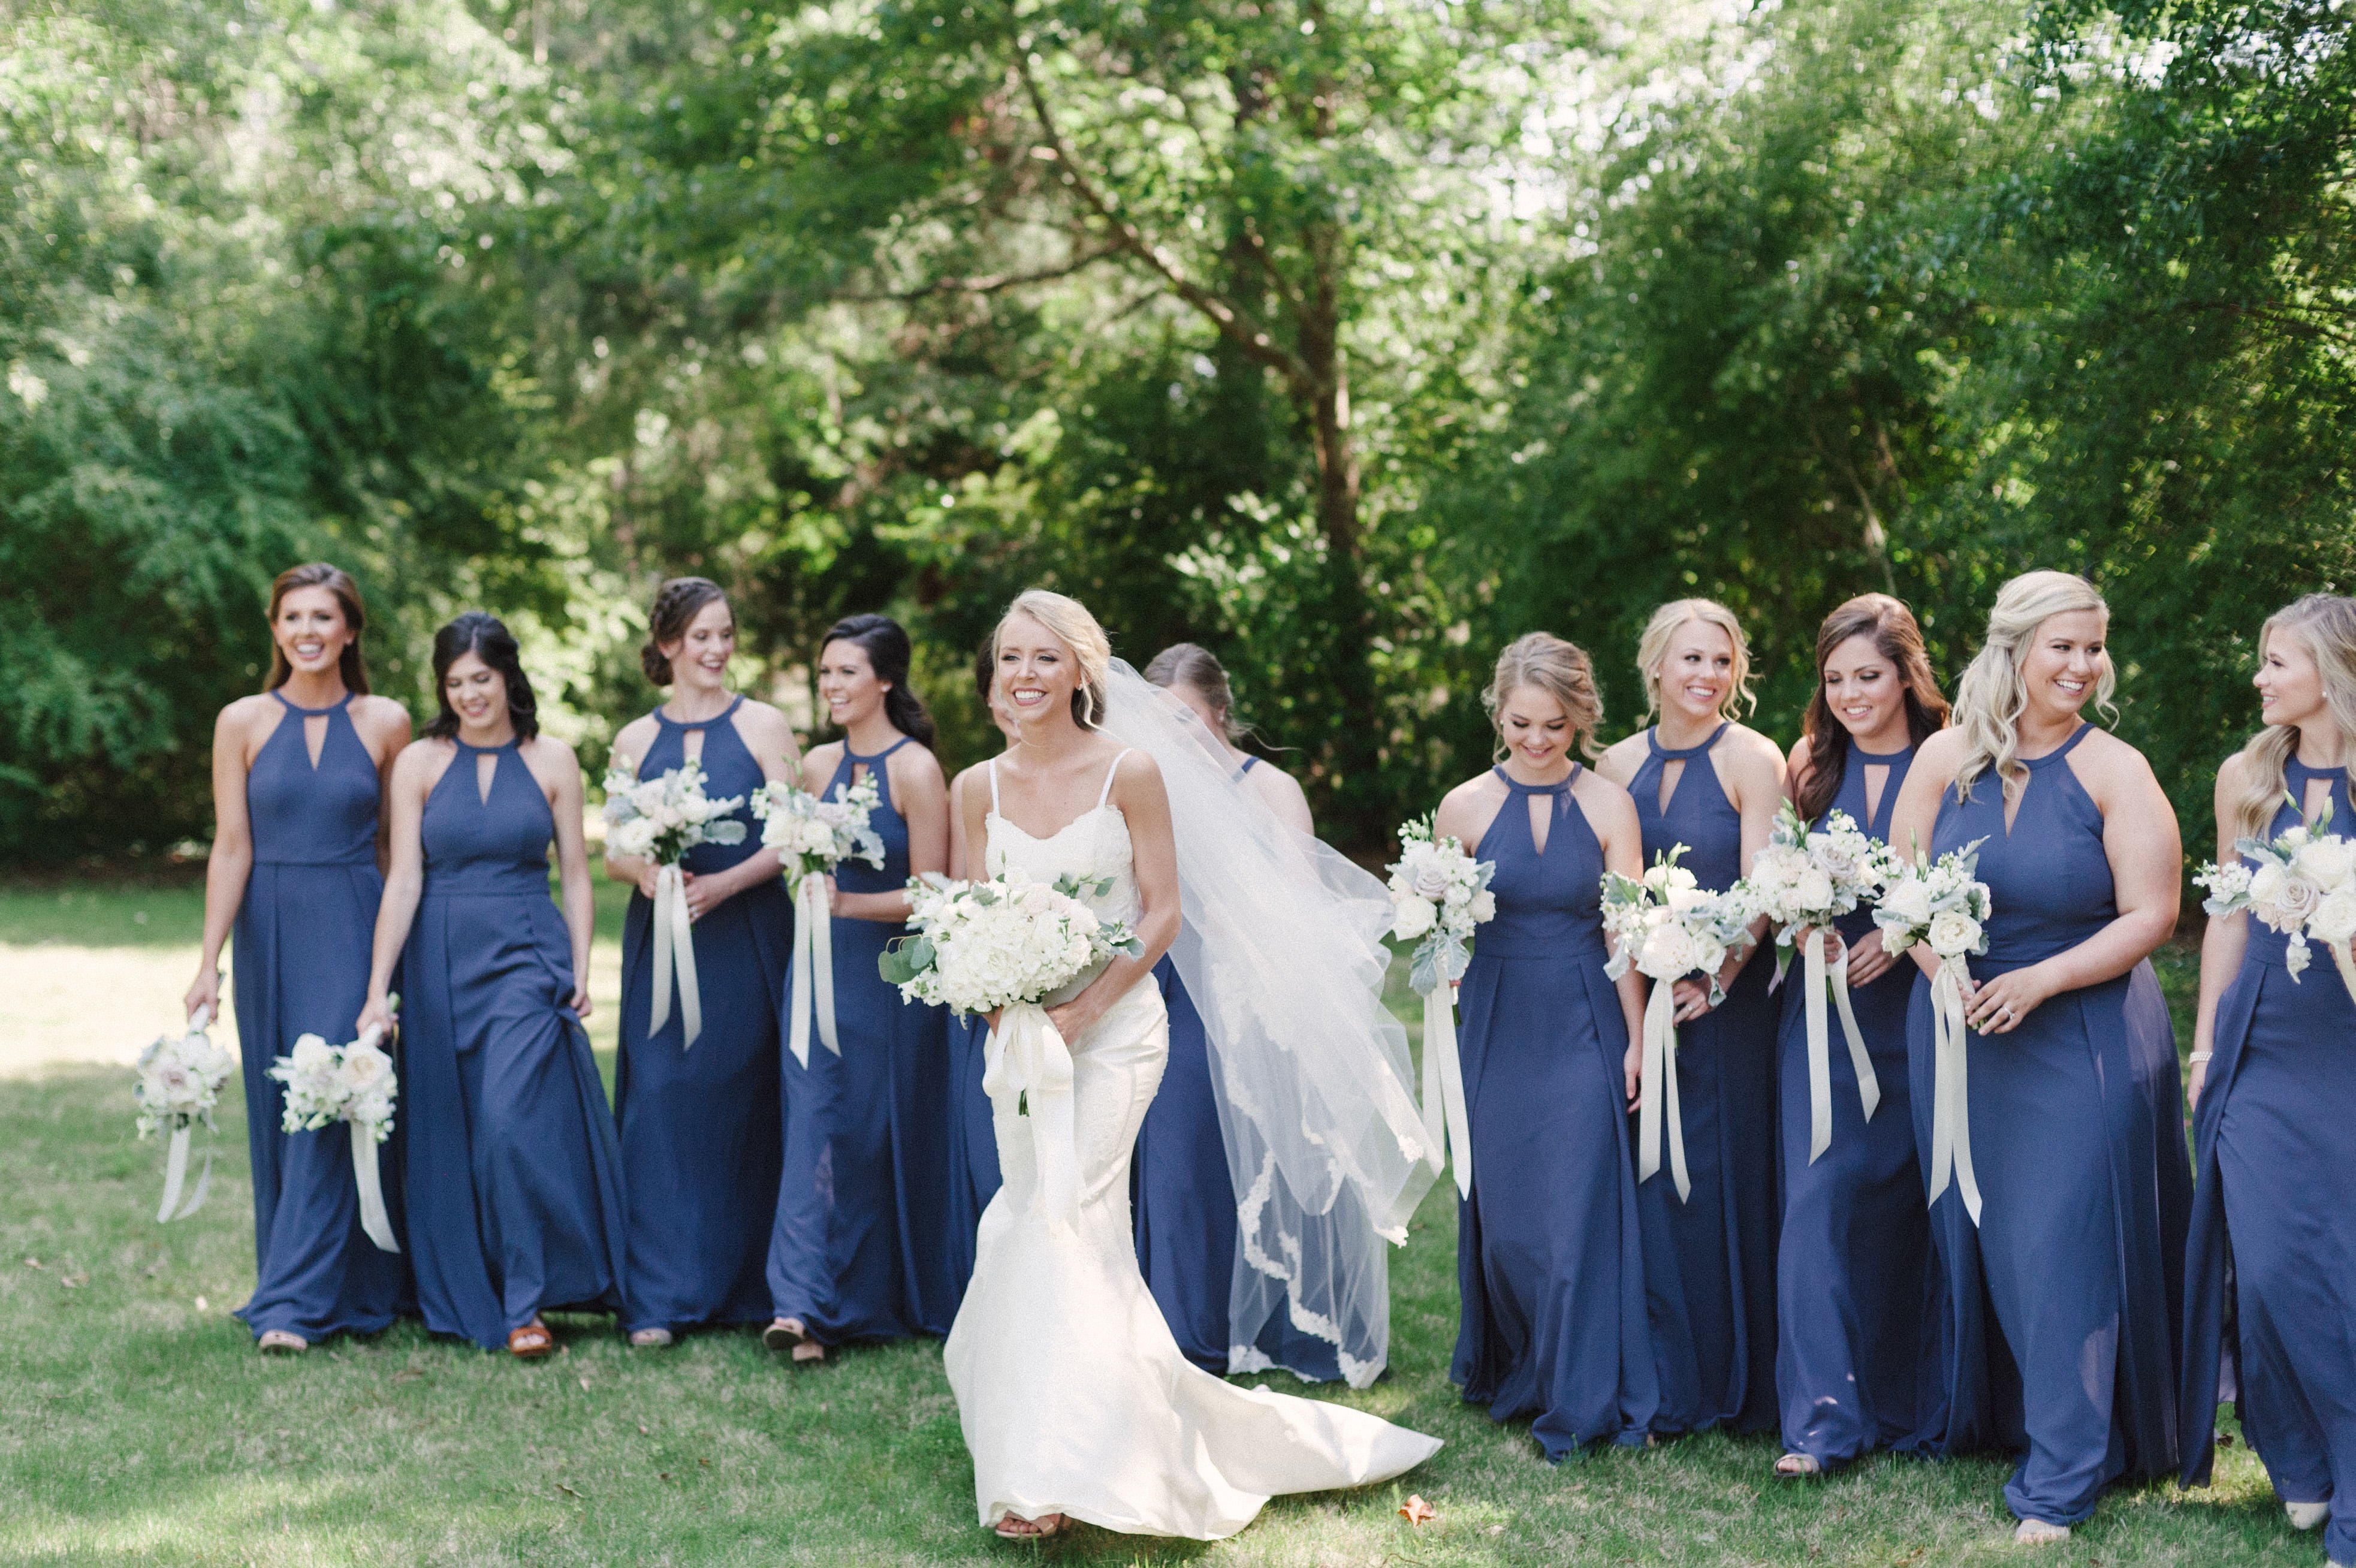 An image of the entire bridal party walking behind bride for her portraits in Selma, AL